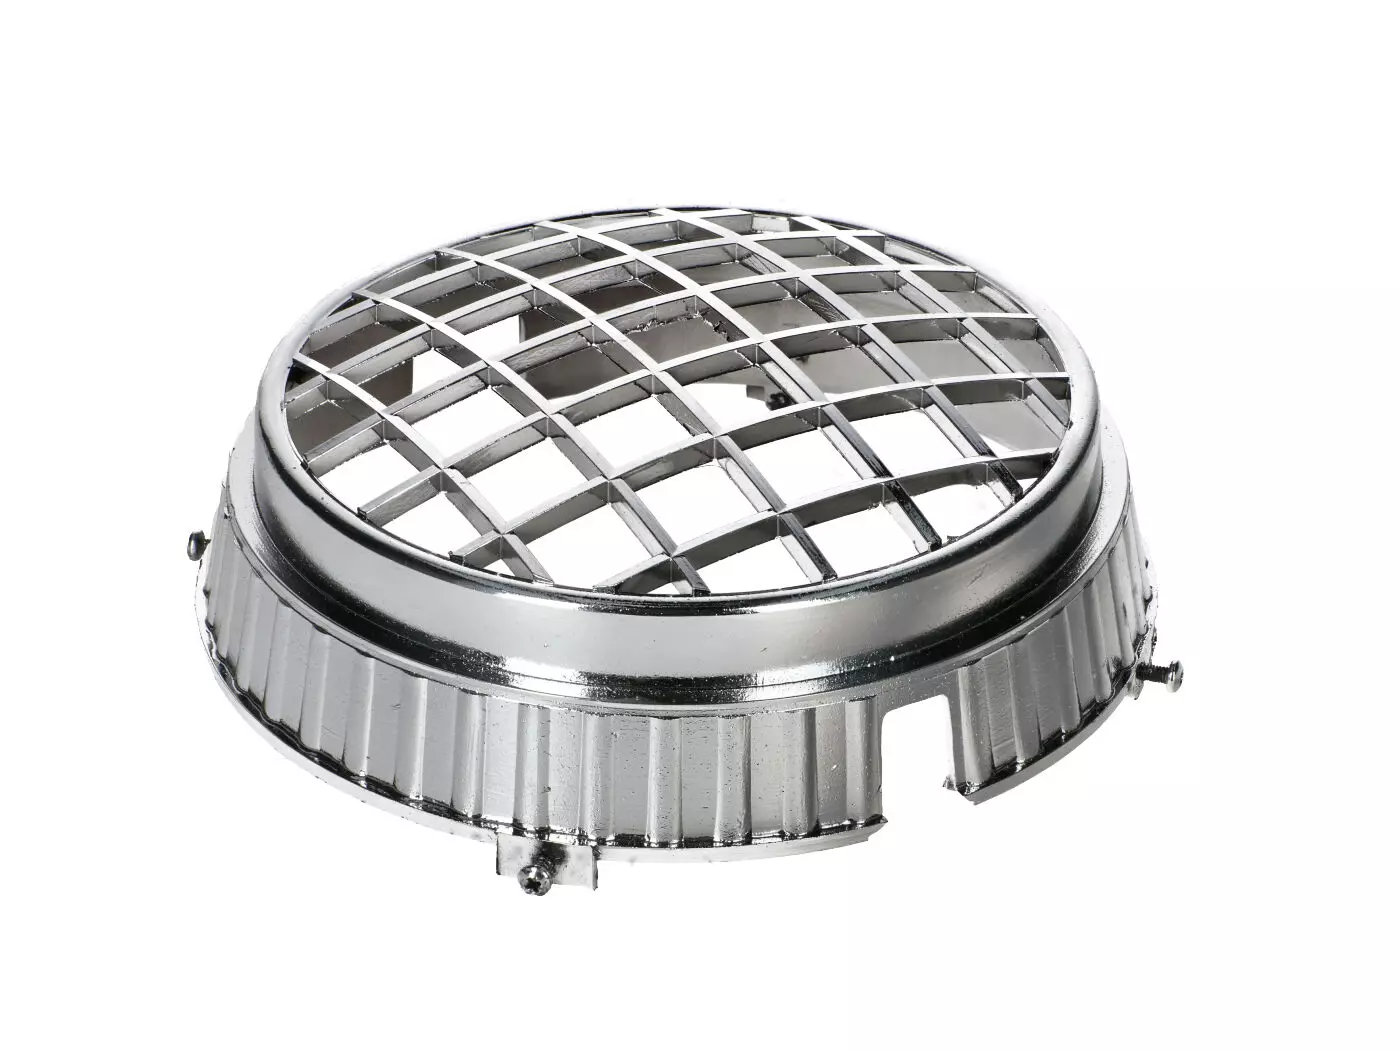 Headlight Grill For Simson S50, S51, S70